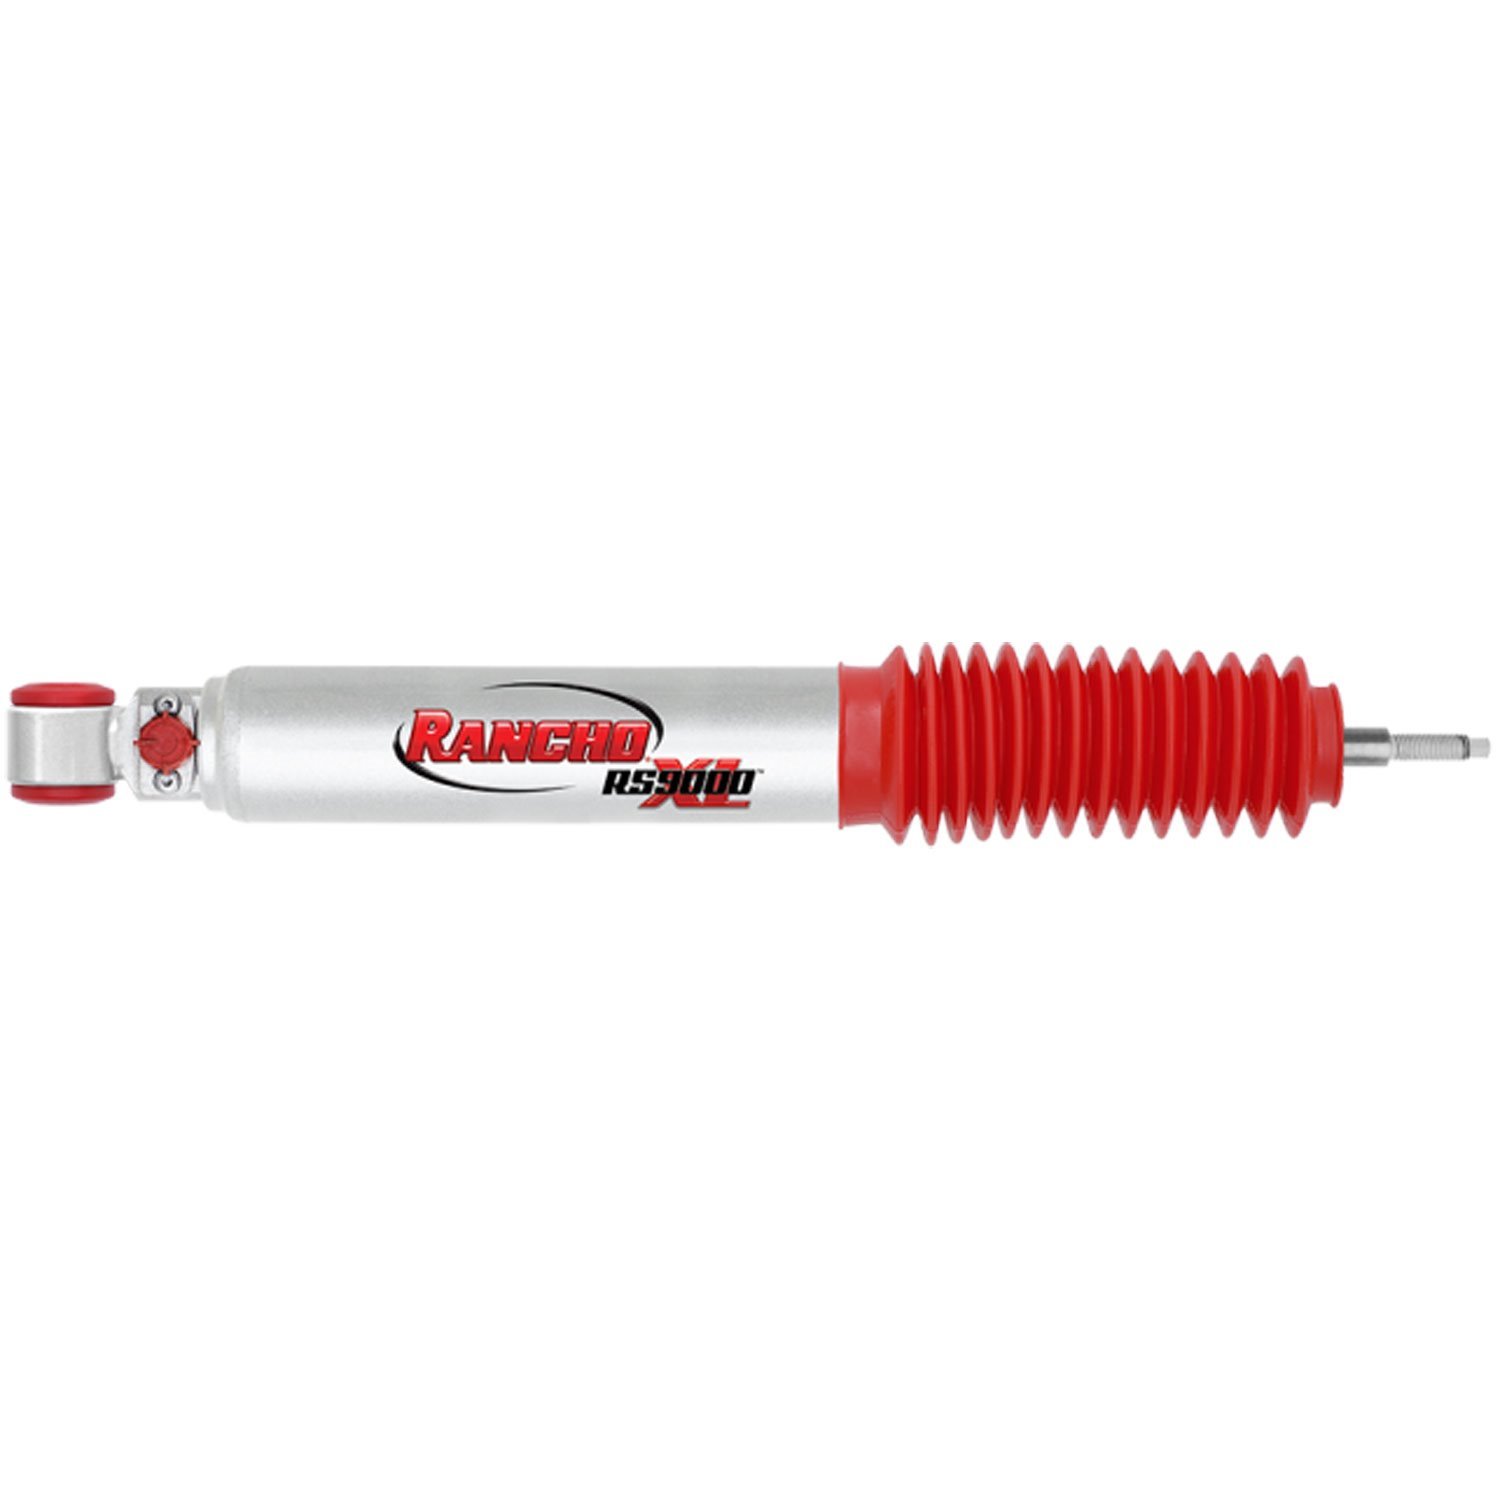 RS9000XL Front Shock Absorber Fits Ford Bronco, Explorer, Ranger and E-Series Van